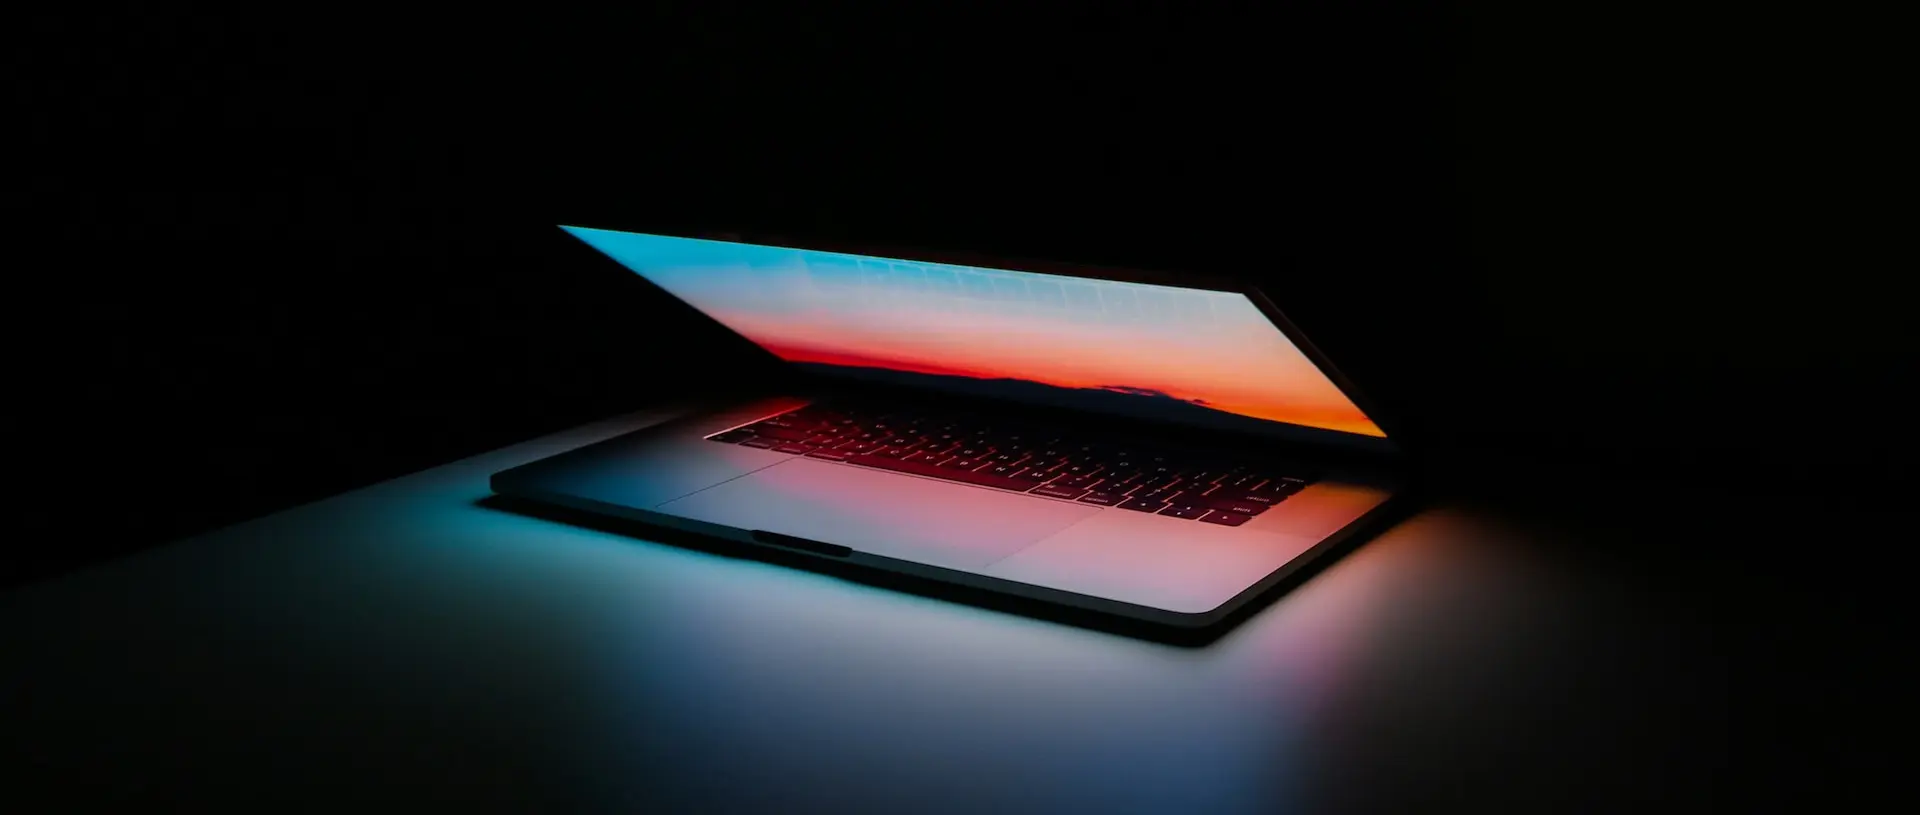 a laptop with a red light